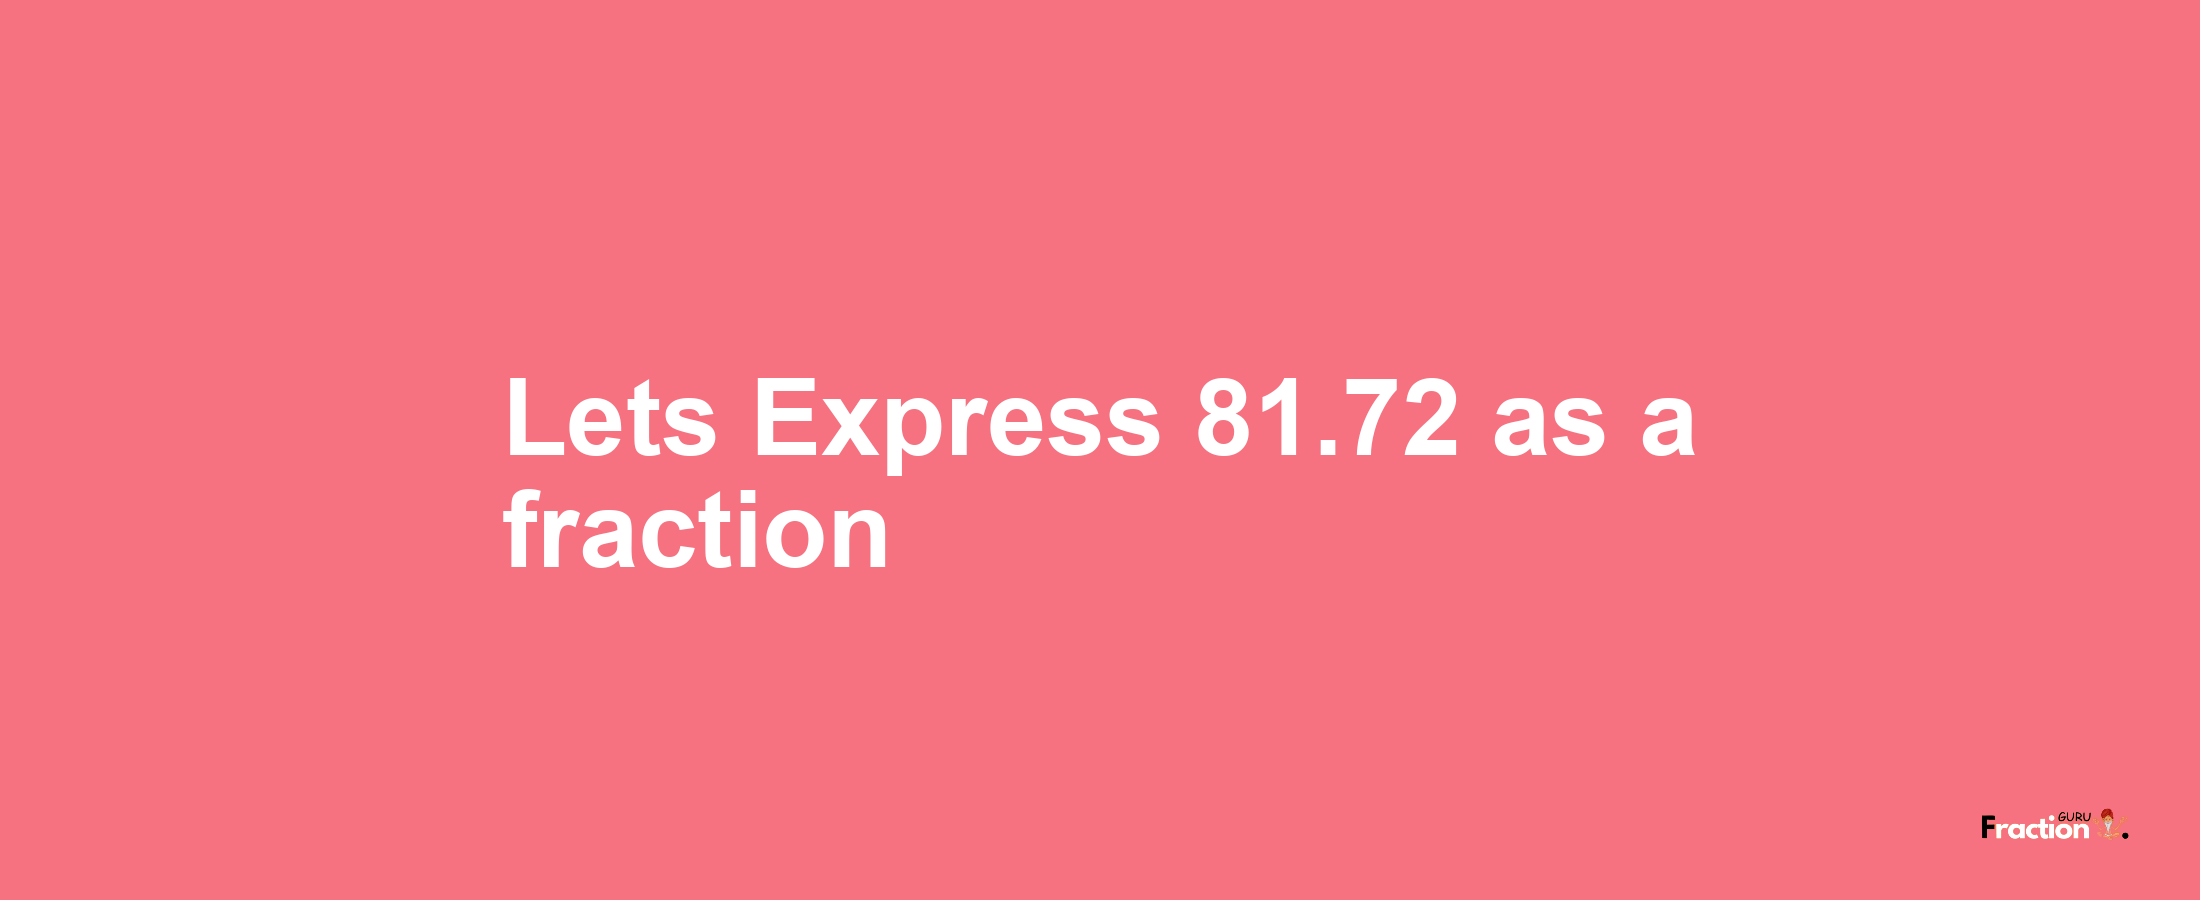 Lets Express 81.72 as afraction